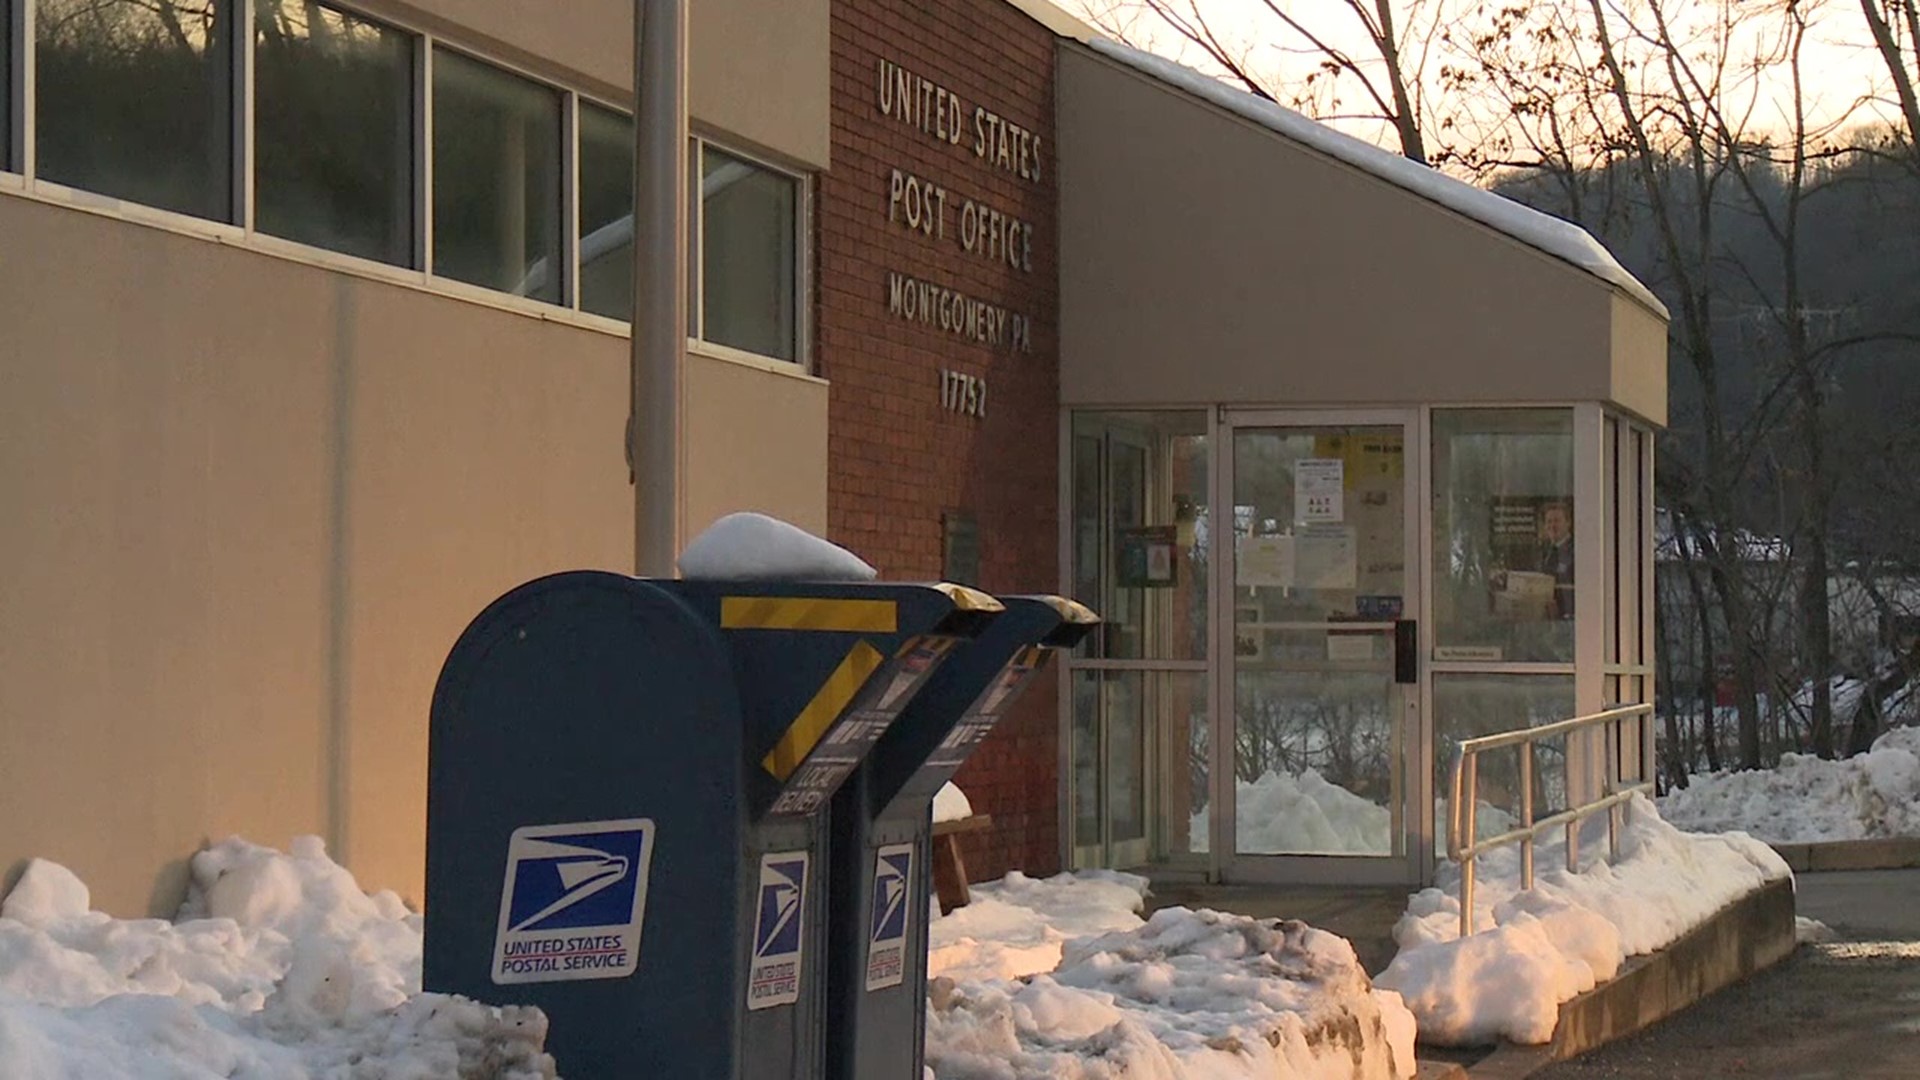 People in Lycoming County say their mail, including bills and other important items, is coming late or even sometimes not at all.